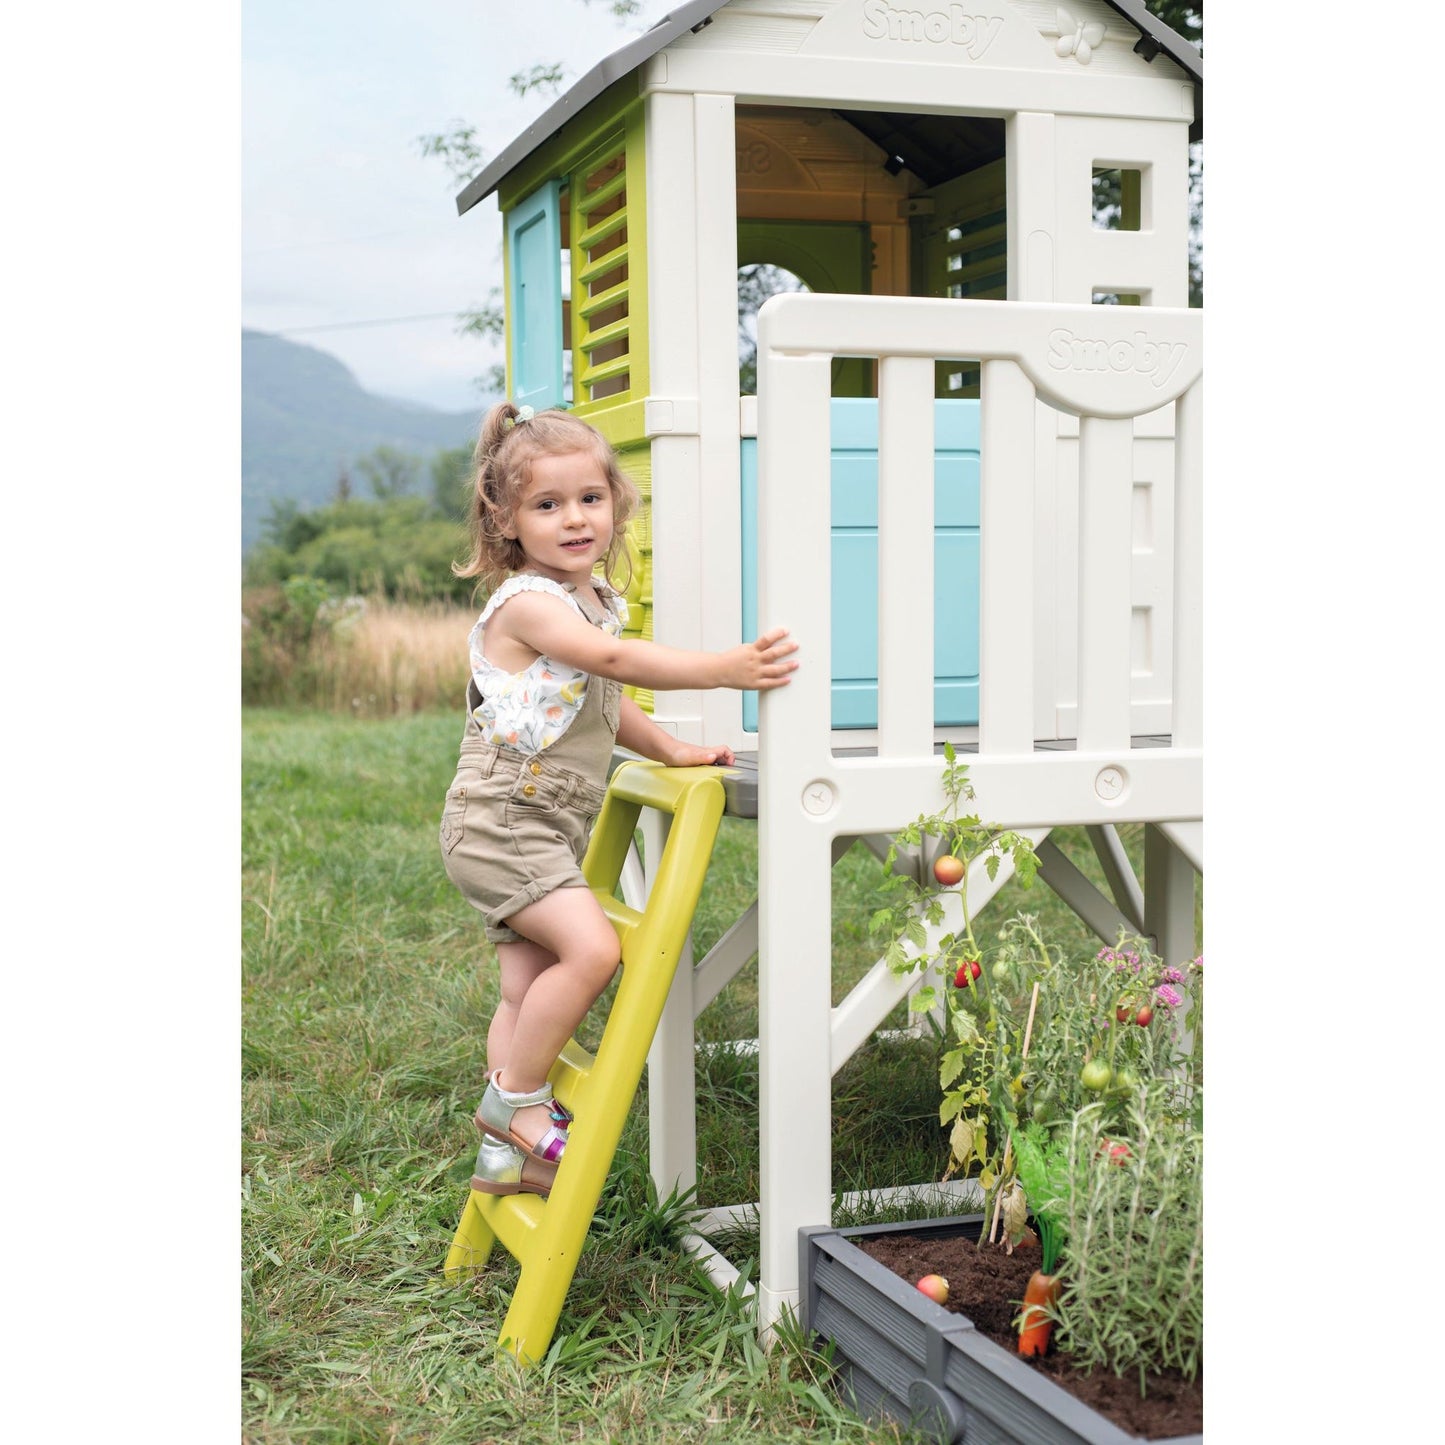 Smoby House On Stilts Playhouse & Accessories - 3 Years +